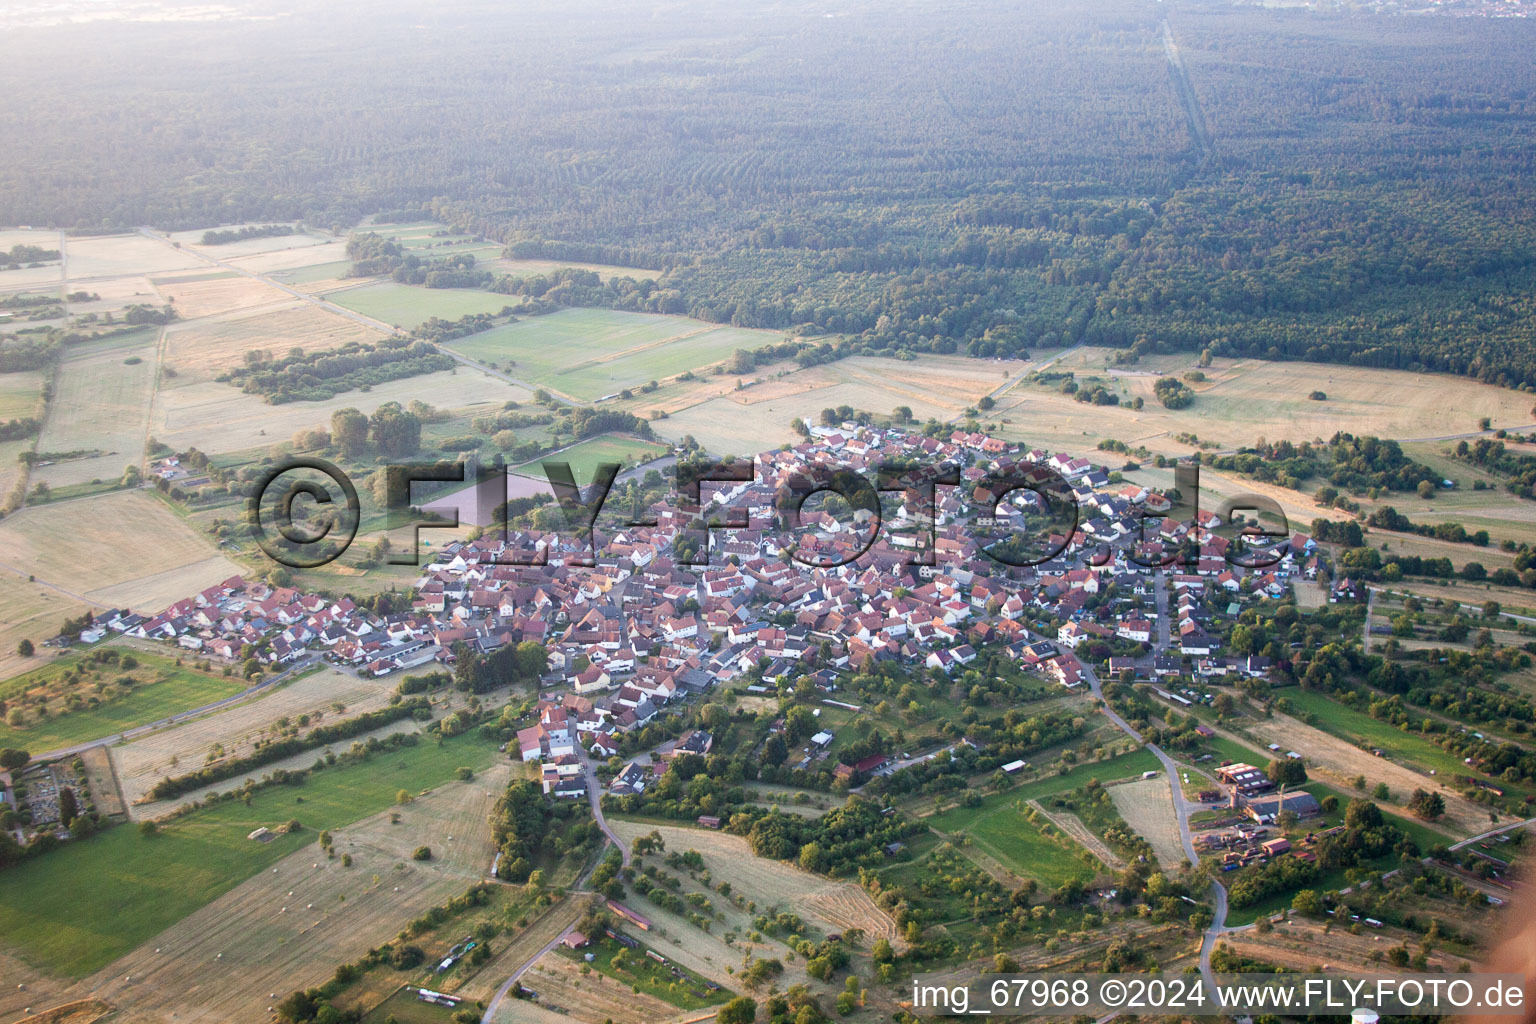 Village view in the district Buechelberg in Woerth am Rhein in the state Rhineland-Palatinate seen from above